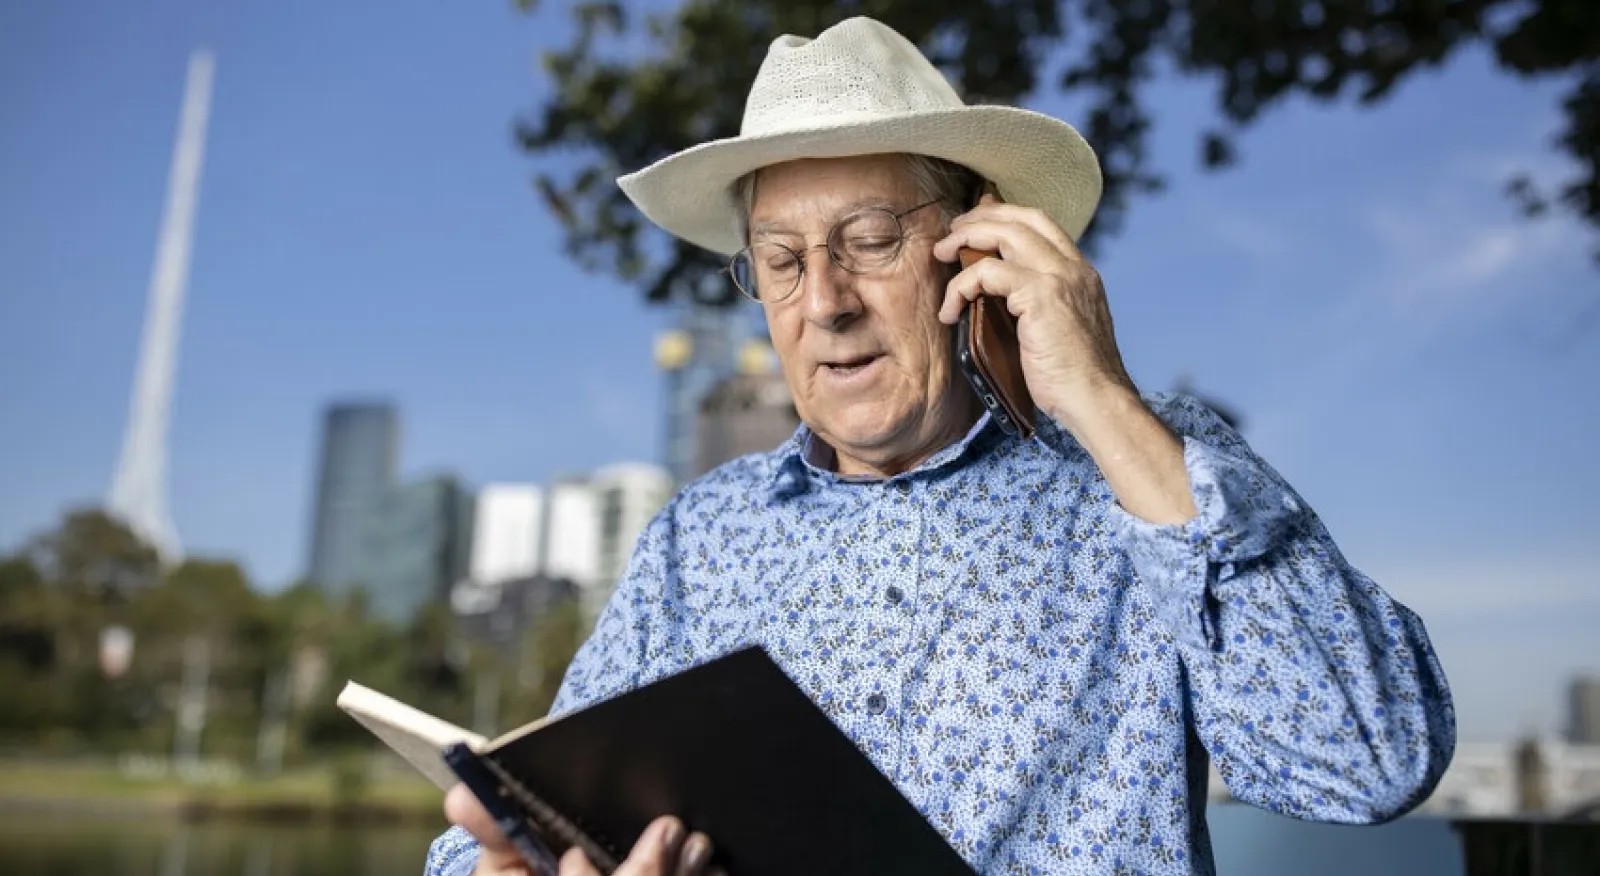 An older man in a blue long-sleeved shirt and wide-brimmed hat is on the phone, looking at a book. In the background is the skyline of Melbourne